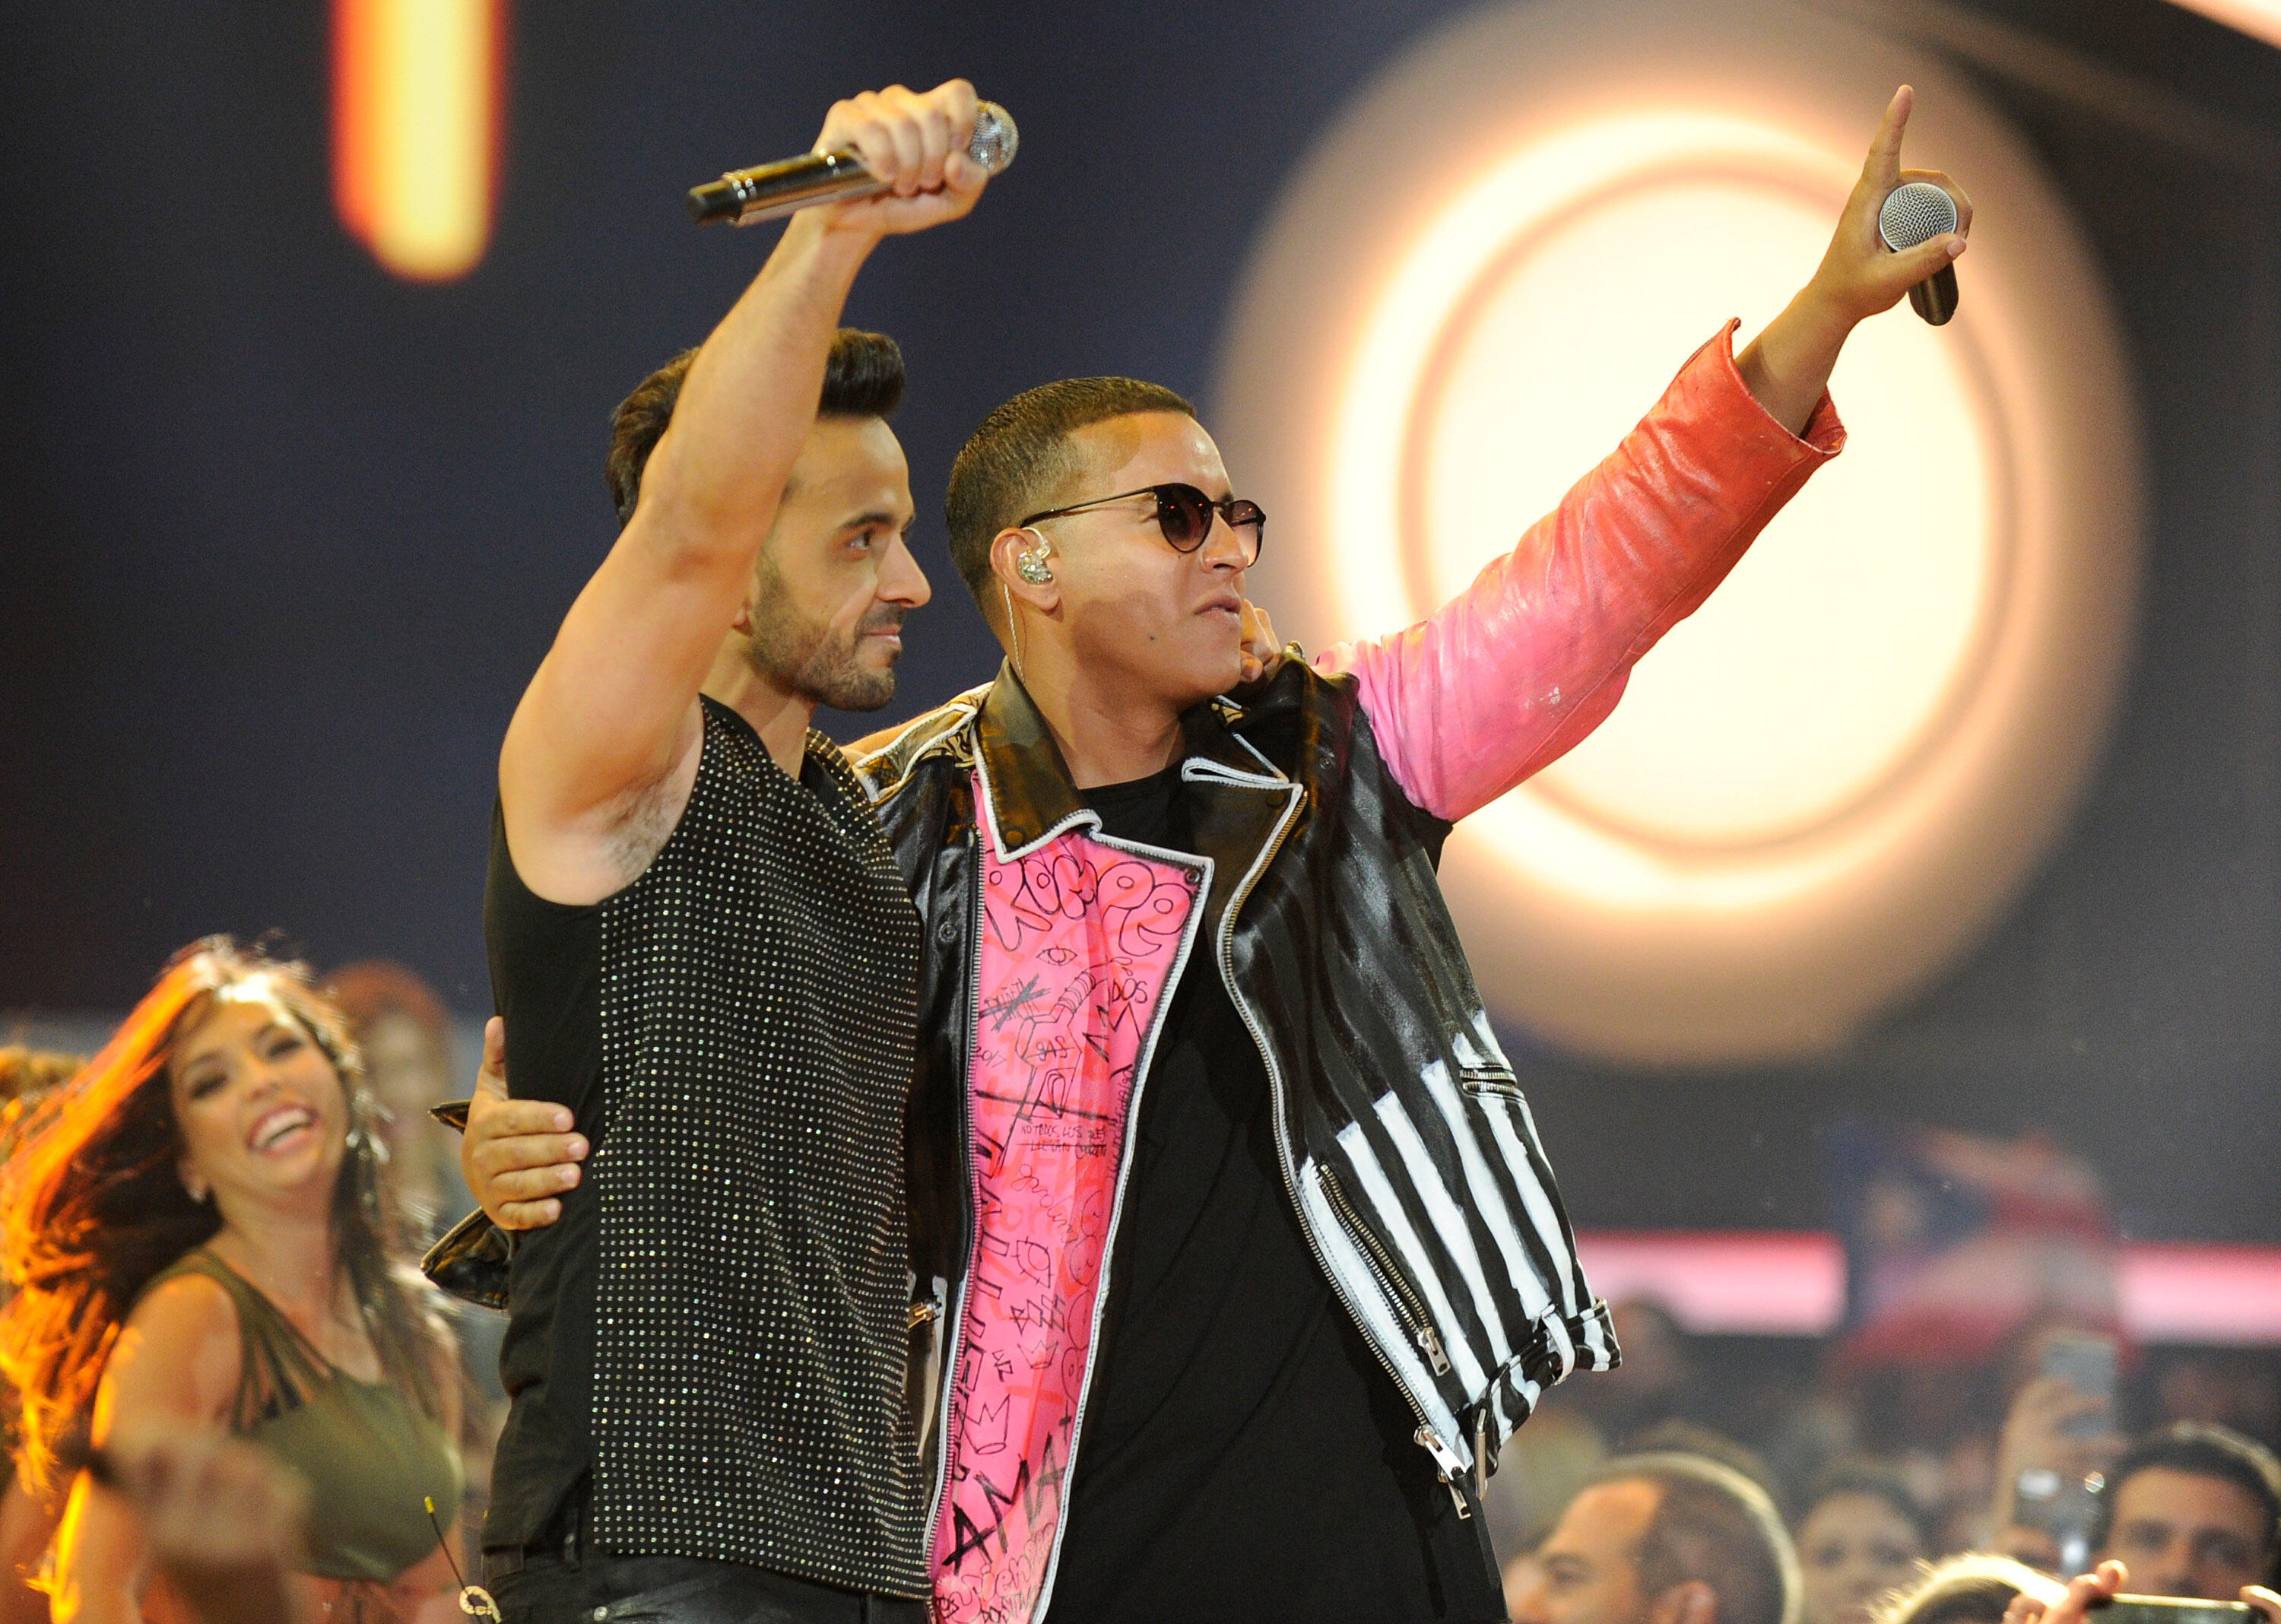 CORAL GABLES, FL - APRIL 27:  Luis Fonsi and Daddy Yankee perform onstage at the Billboard Latin Music Awards at Watsco Center on April 27, 2017 in Coral Gables, Florida.  (Photo by Sergi Alexander/Getty Images)